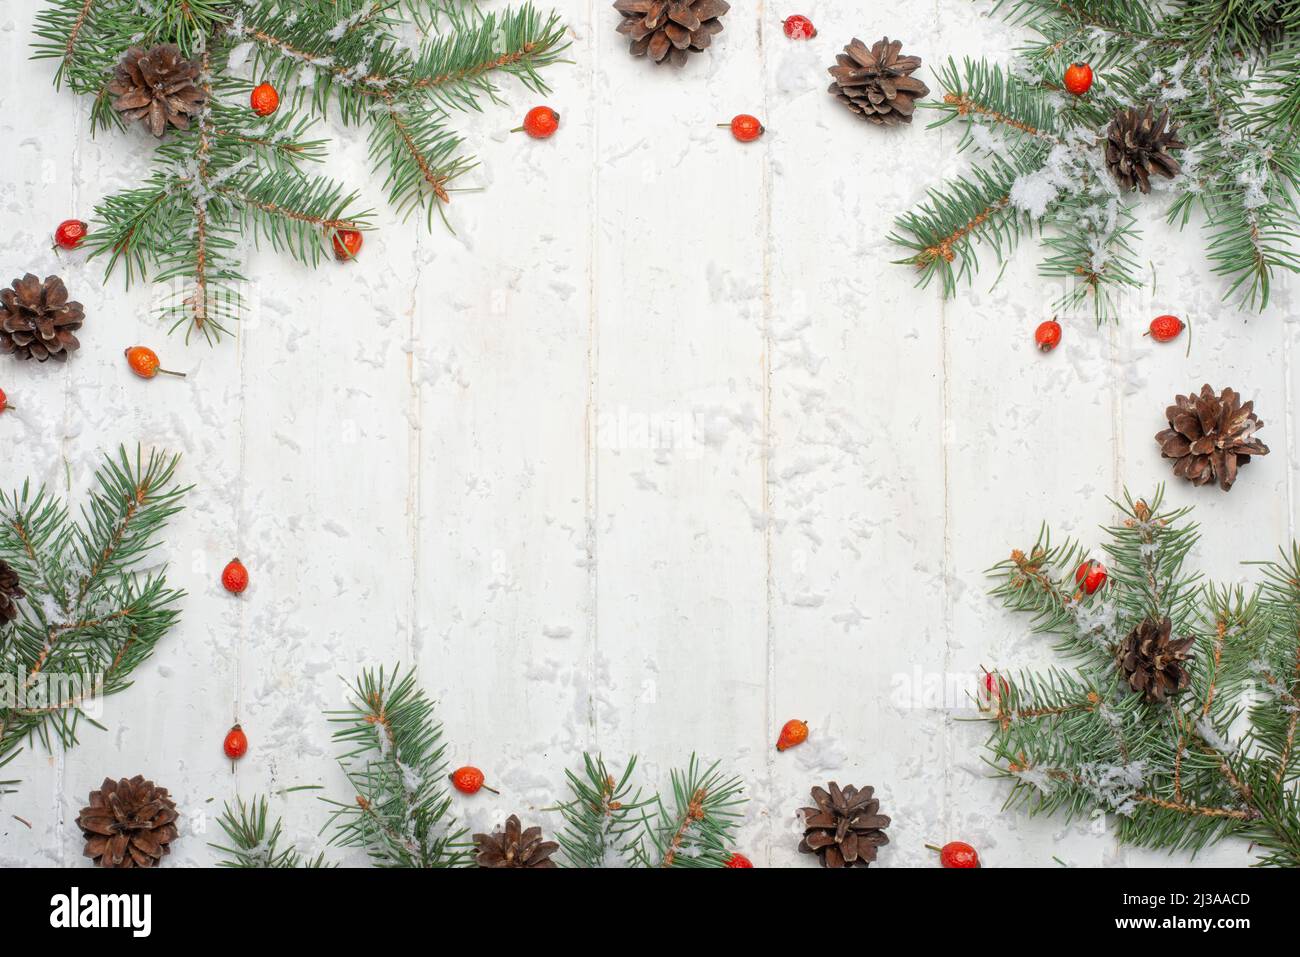 Christmas frame made of fir branches, red berries. Christmas wallpaper. Flat lay, top view, copy space Stock Photo